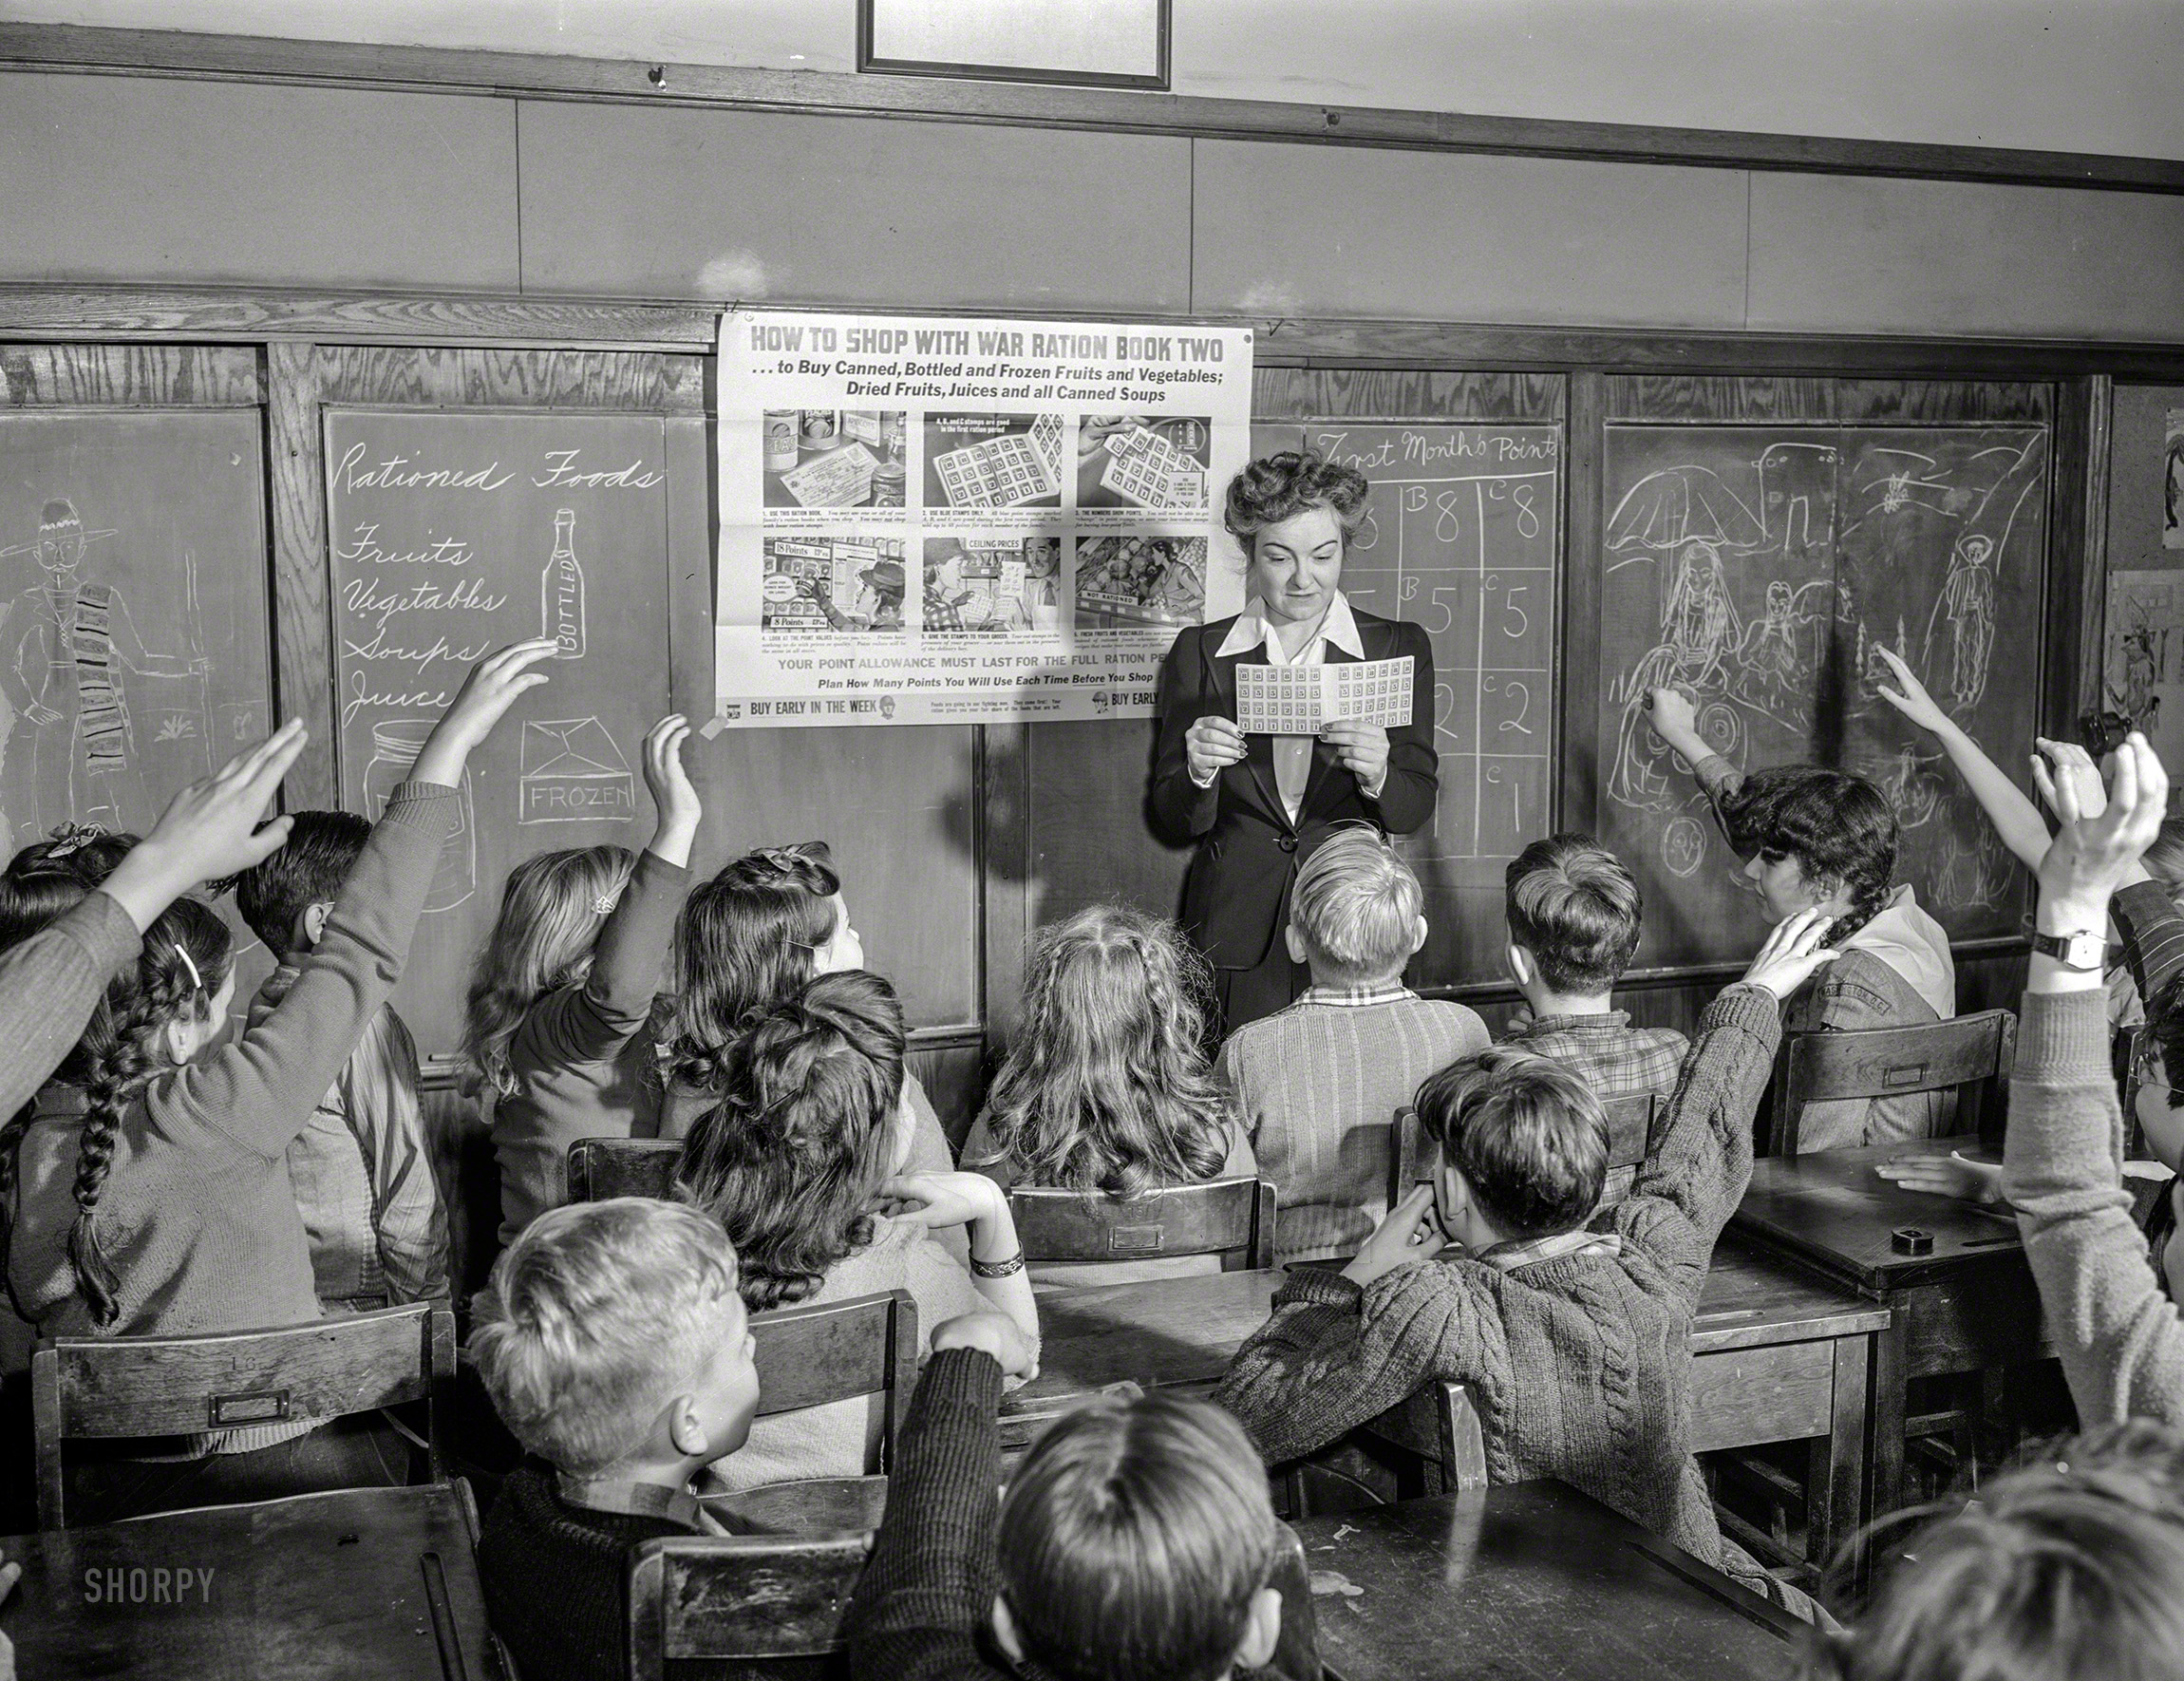 Washington, D.C., circa 1942. "Food rationing stamps. Demonstration of point rationing plan in schools." With what seem to be some tasty sides of Mexican culture. United States Office of War Information photo. View full size.